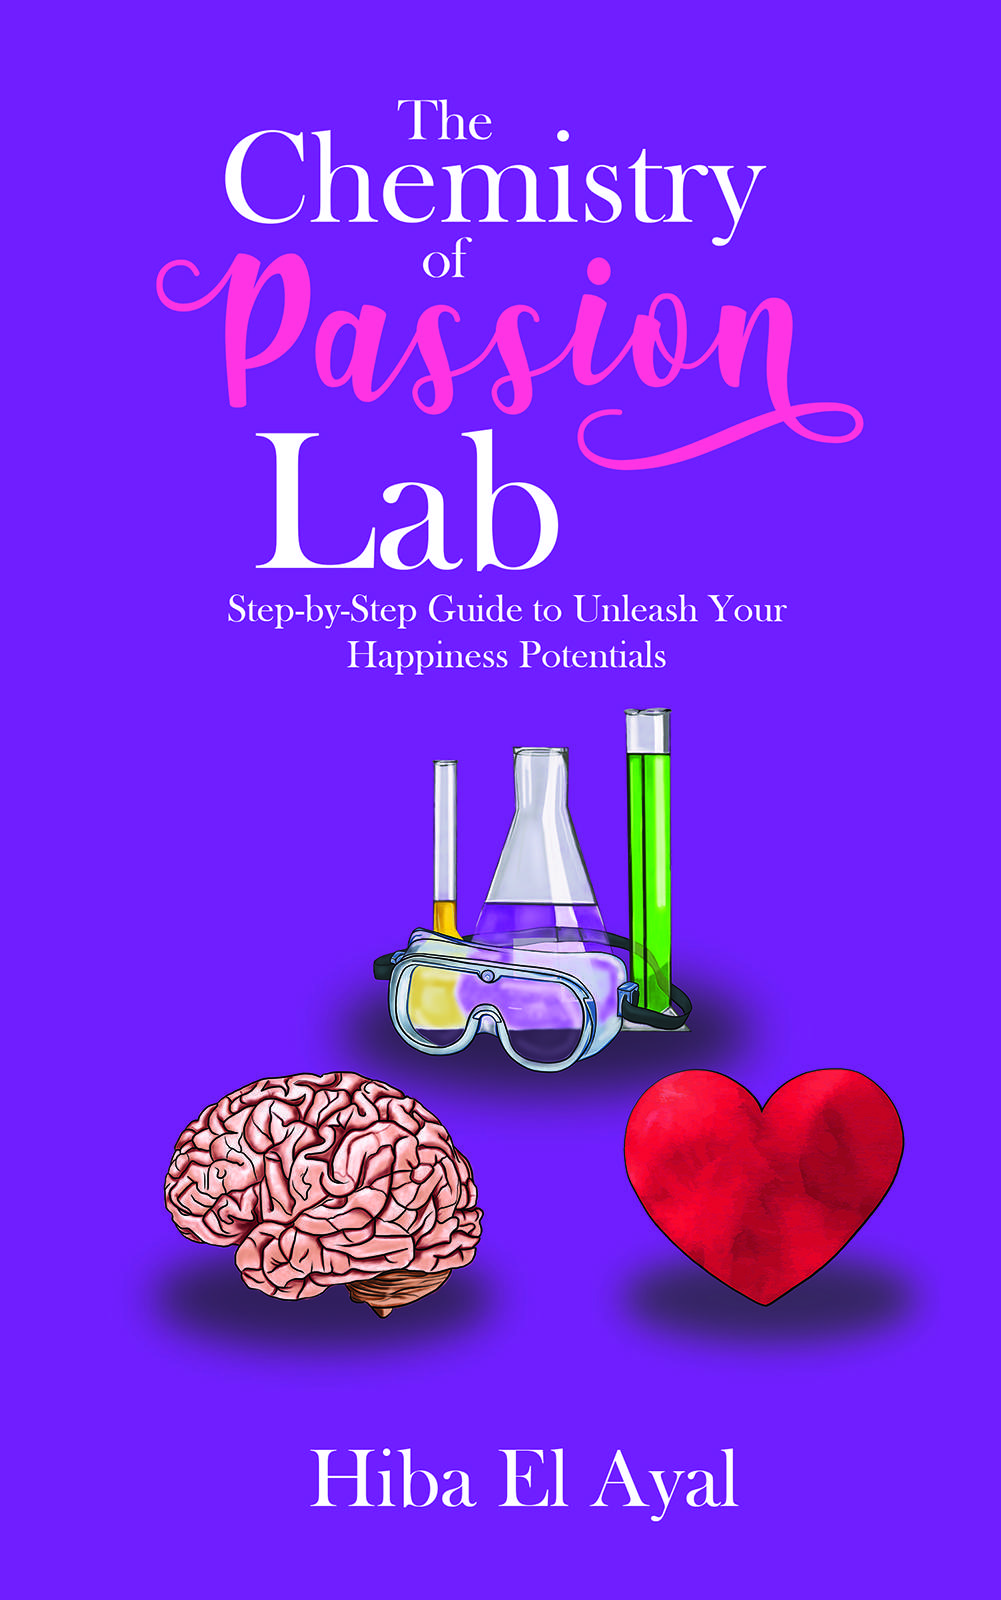 The Chemistry of Passion Lab ISBN-9789948374831